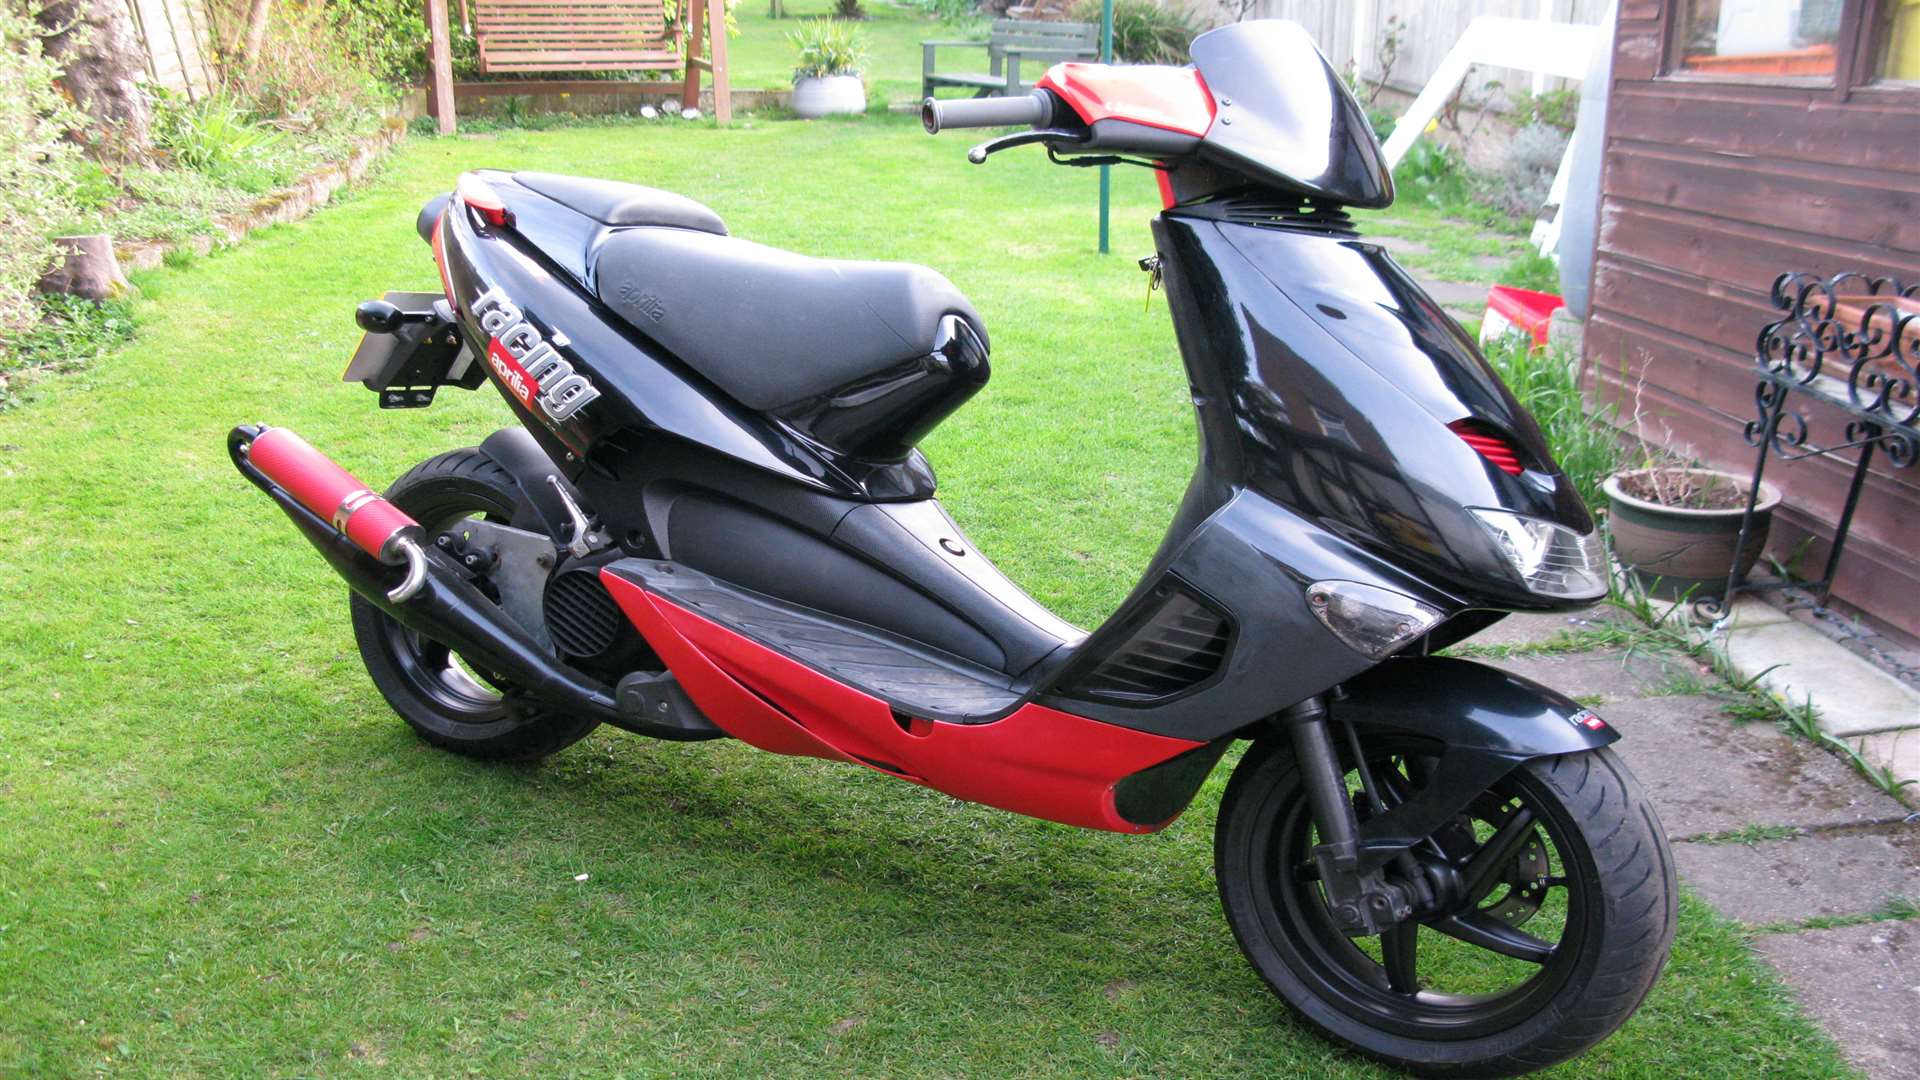 Scooter stolen from outside a home in Canadian Avenue, Gillingham